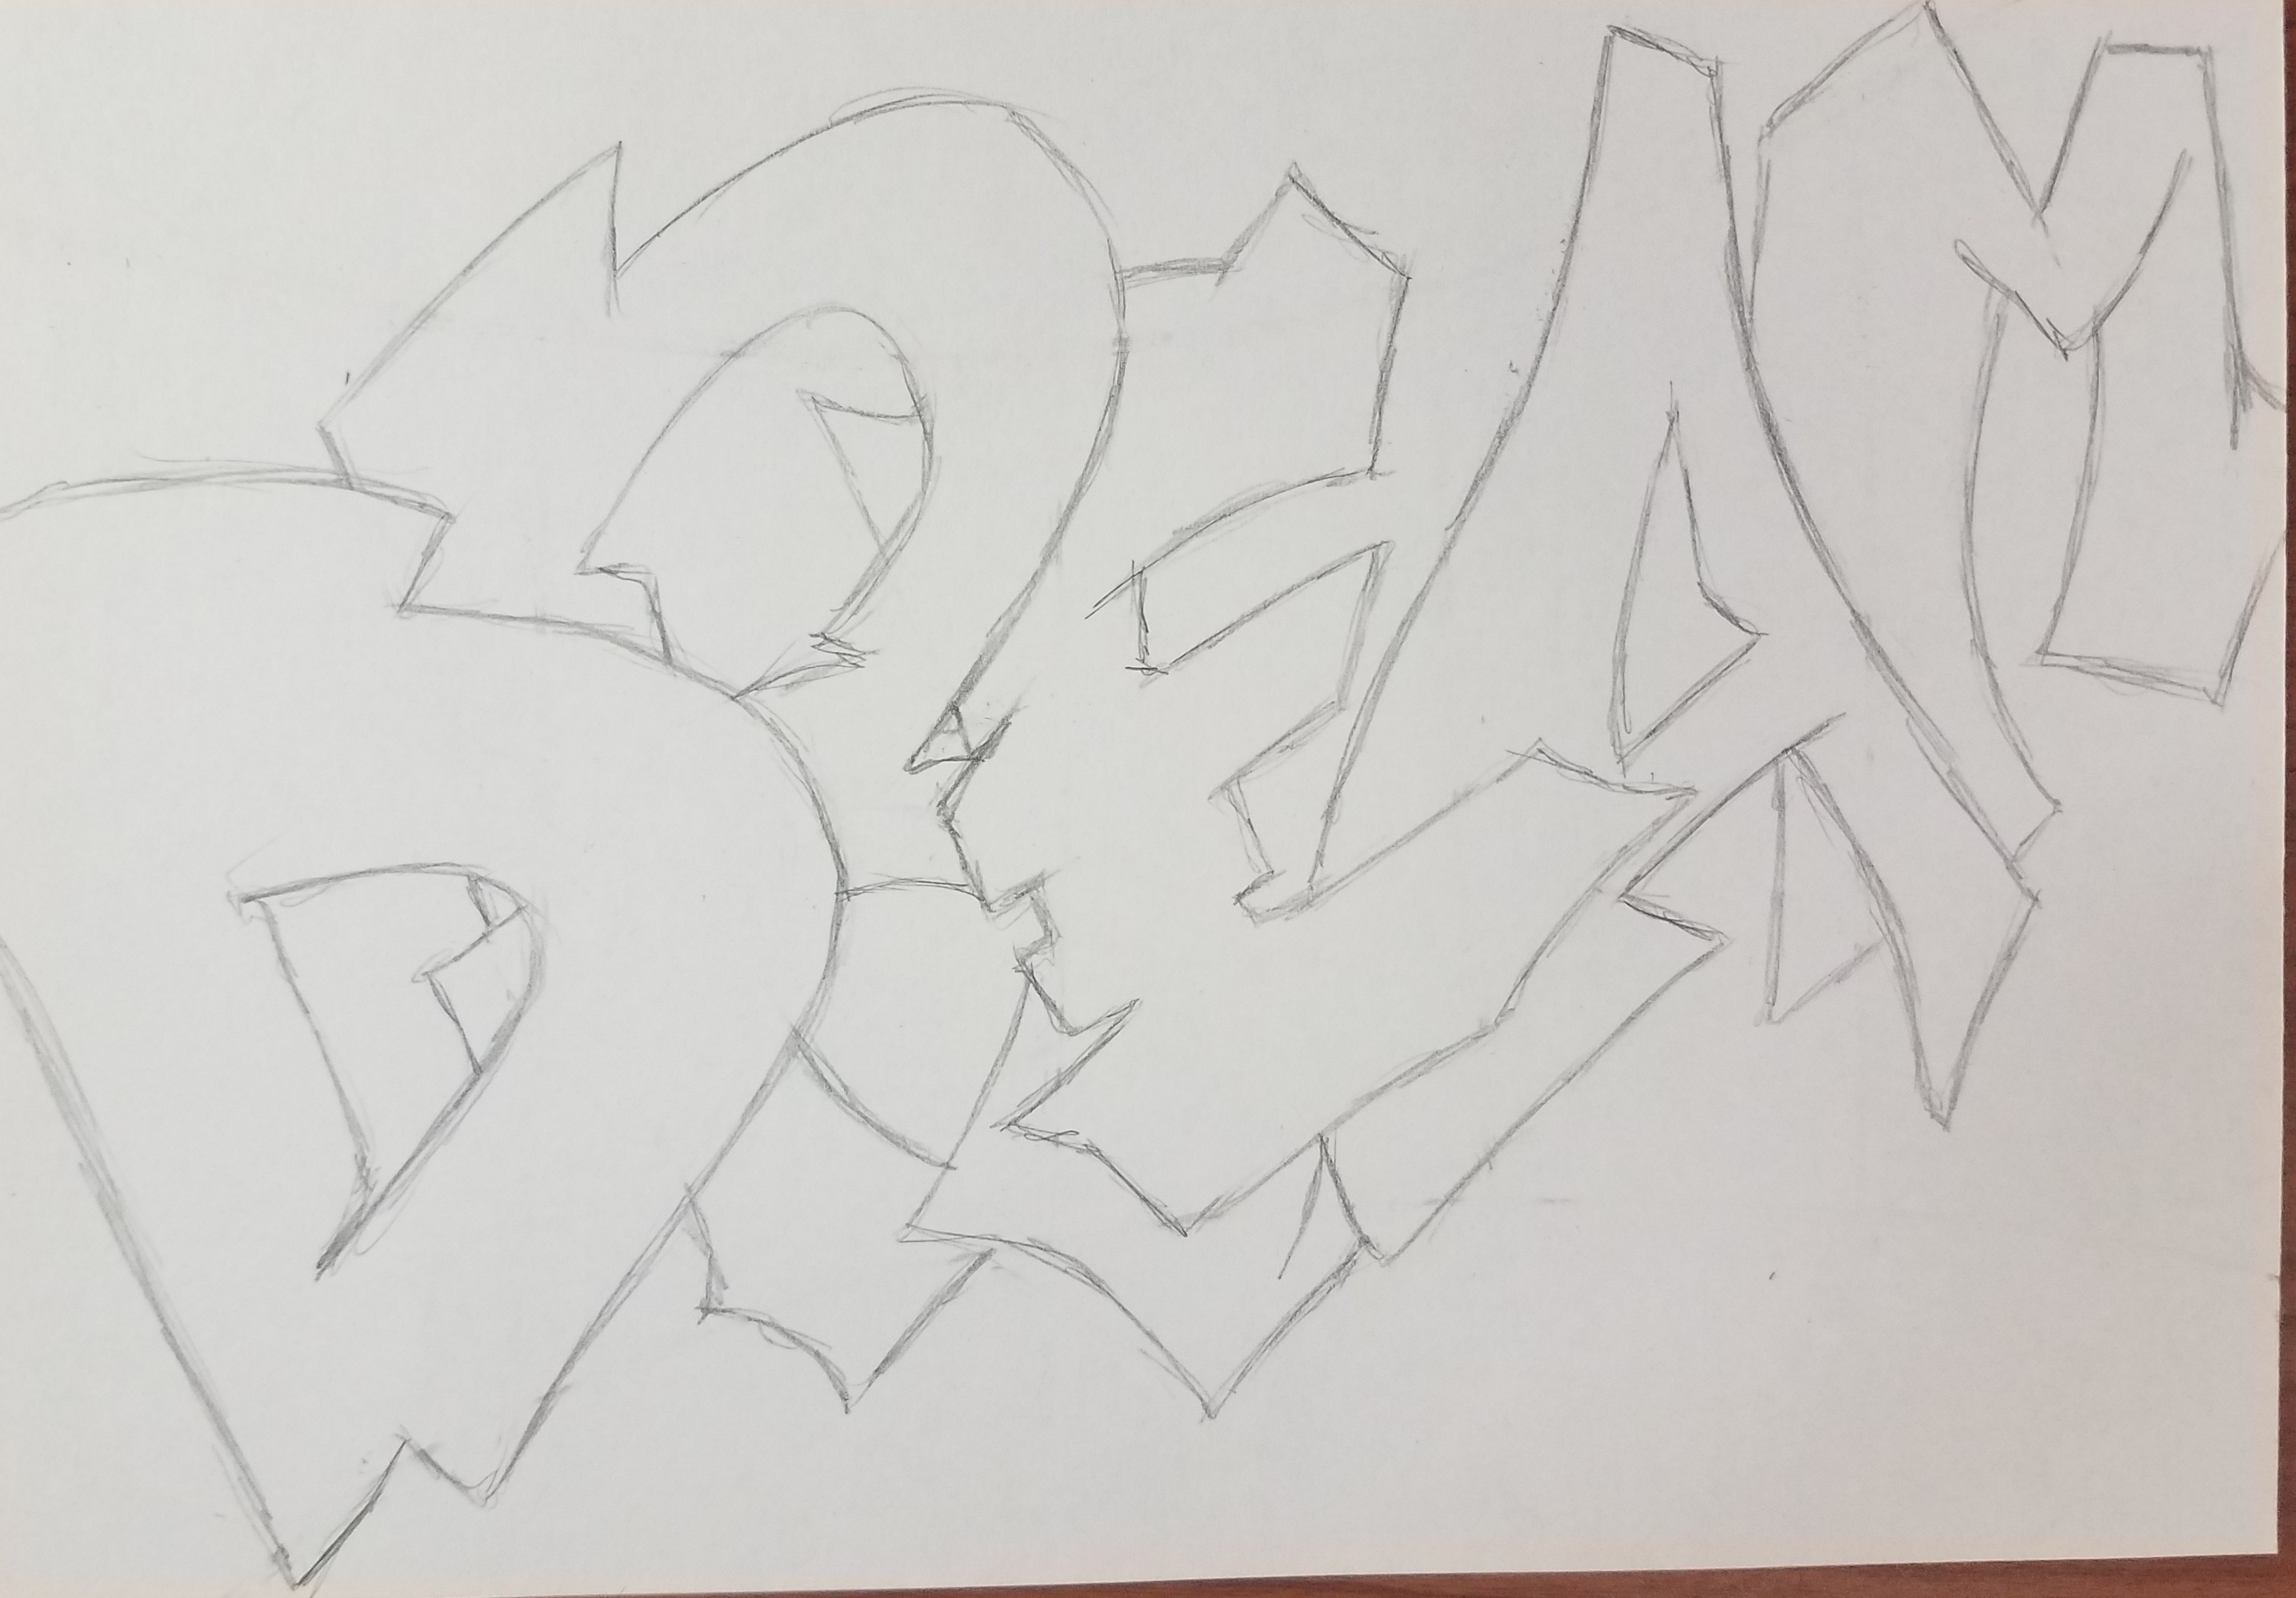 how to draw graffiti names step by step on paper